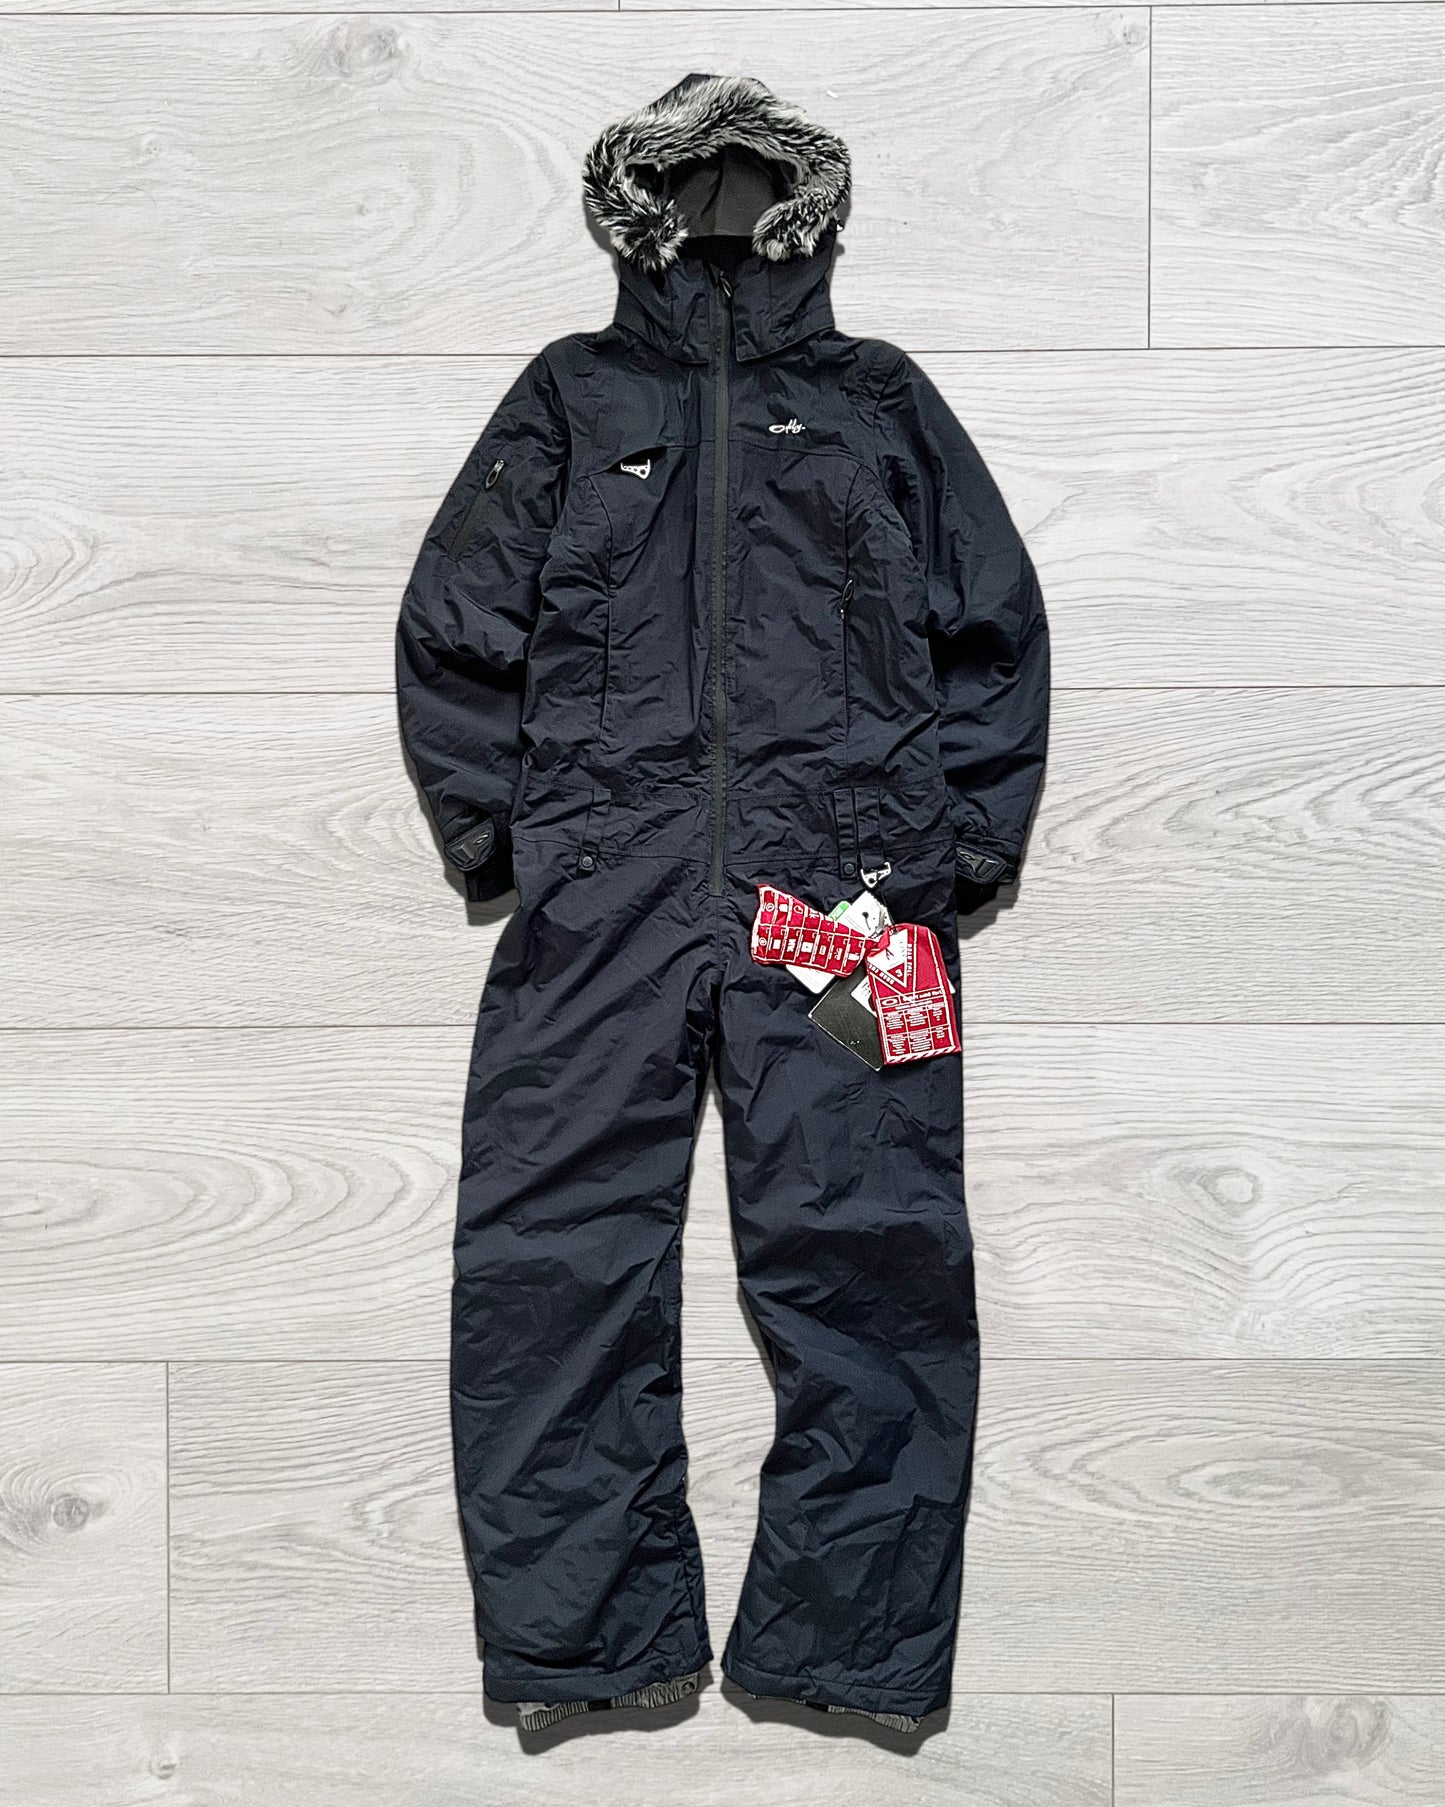 Oakley Road Fuel 00s Insulated Fur Hood Ski Suit - Size S